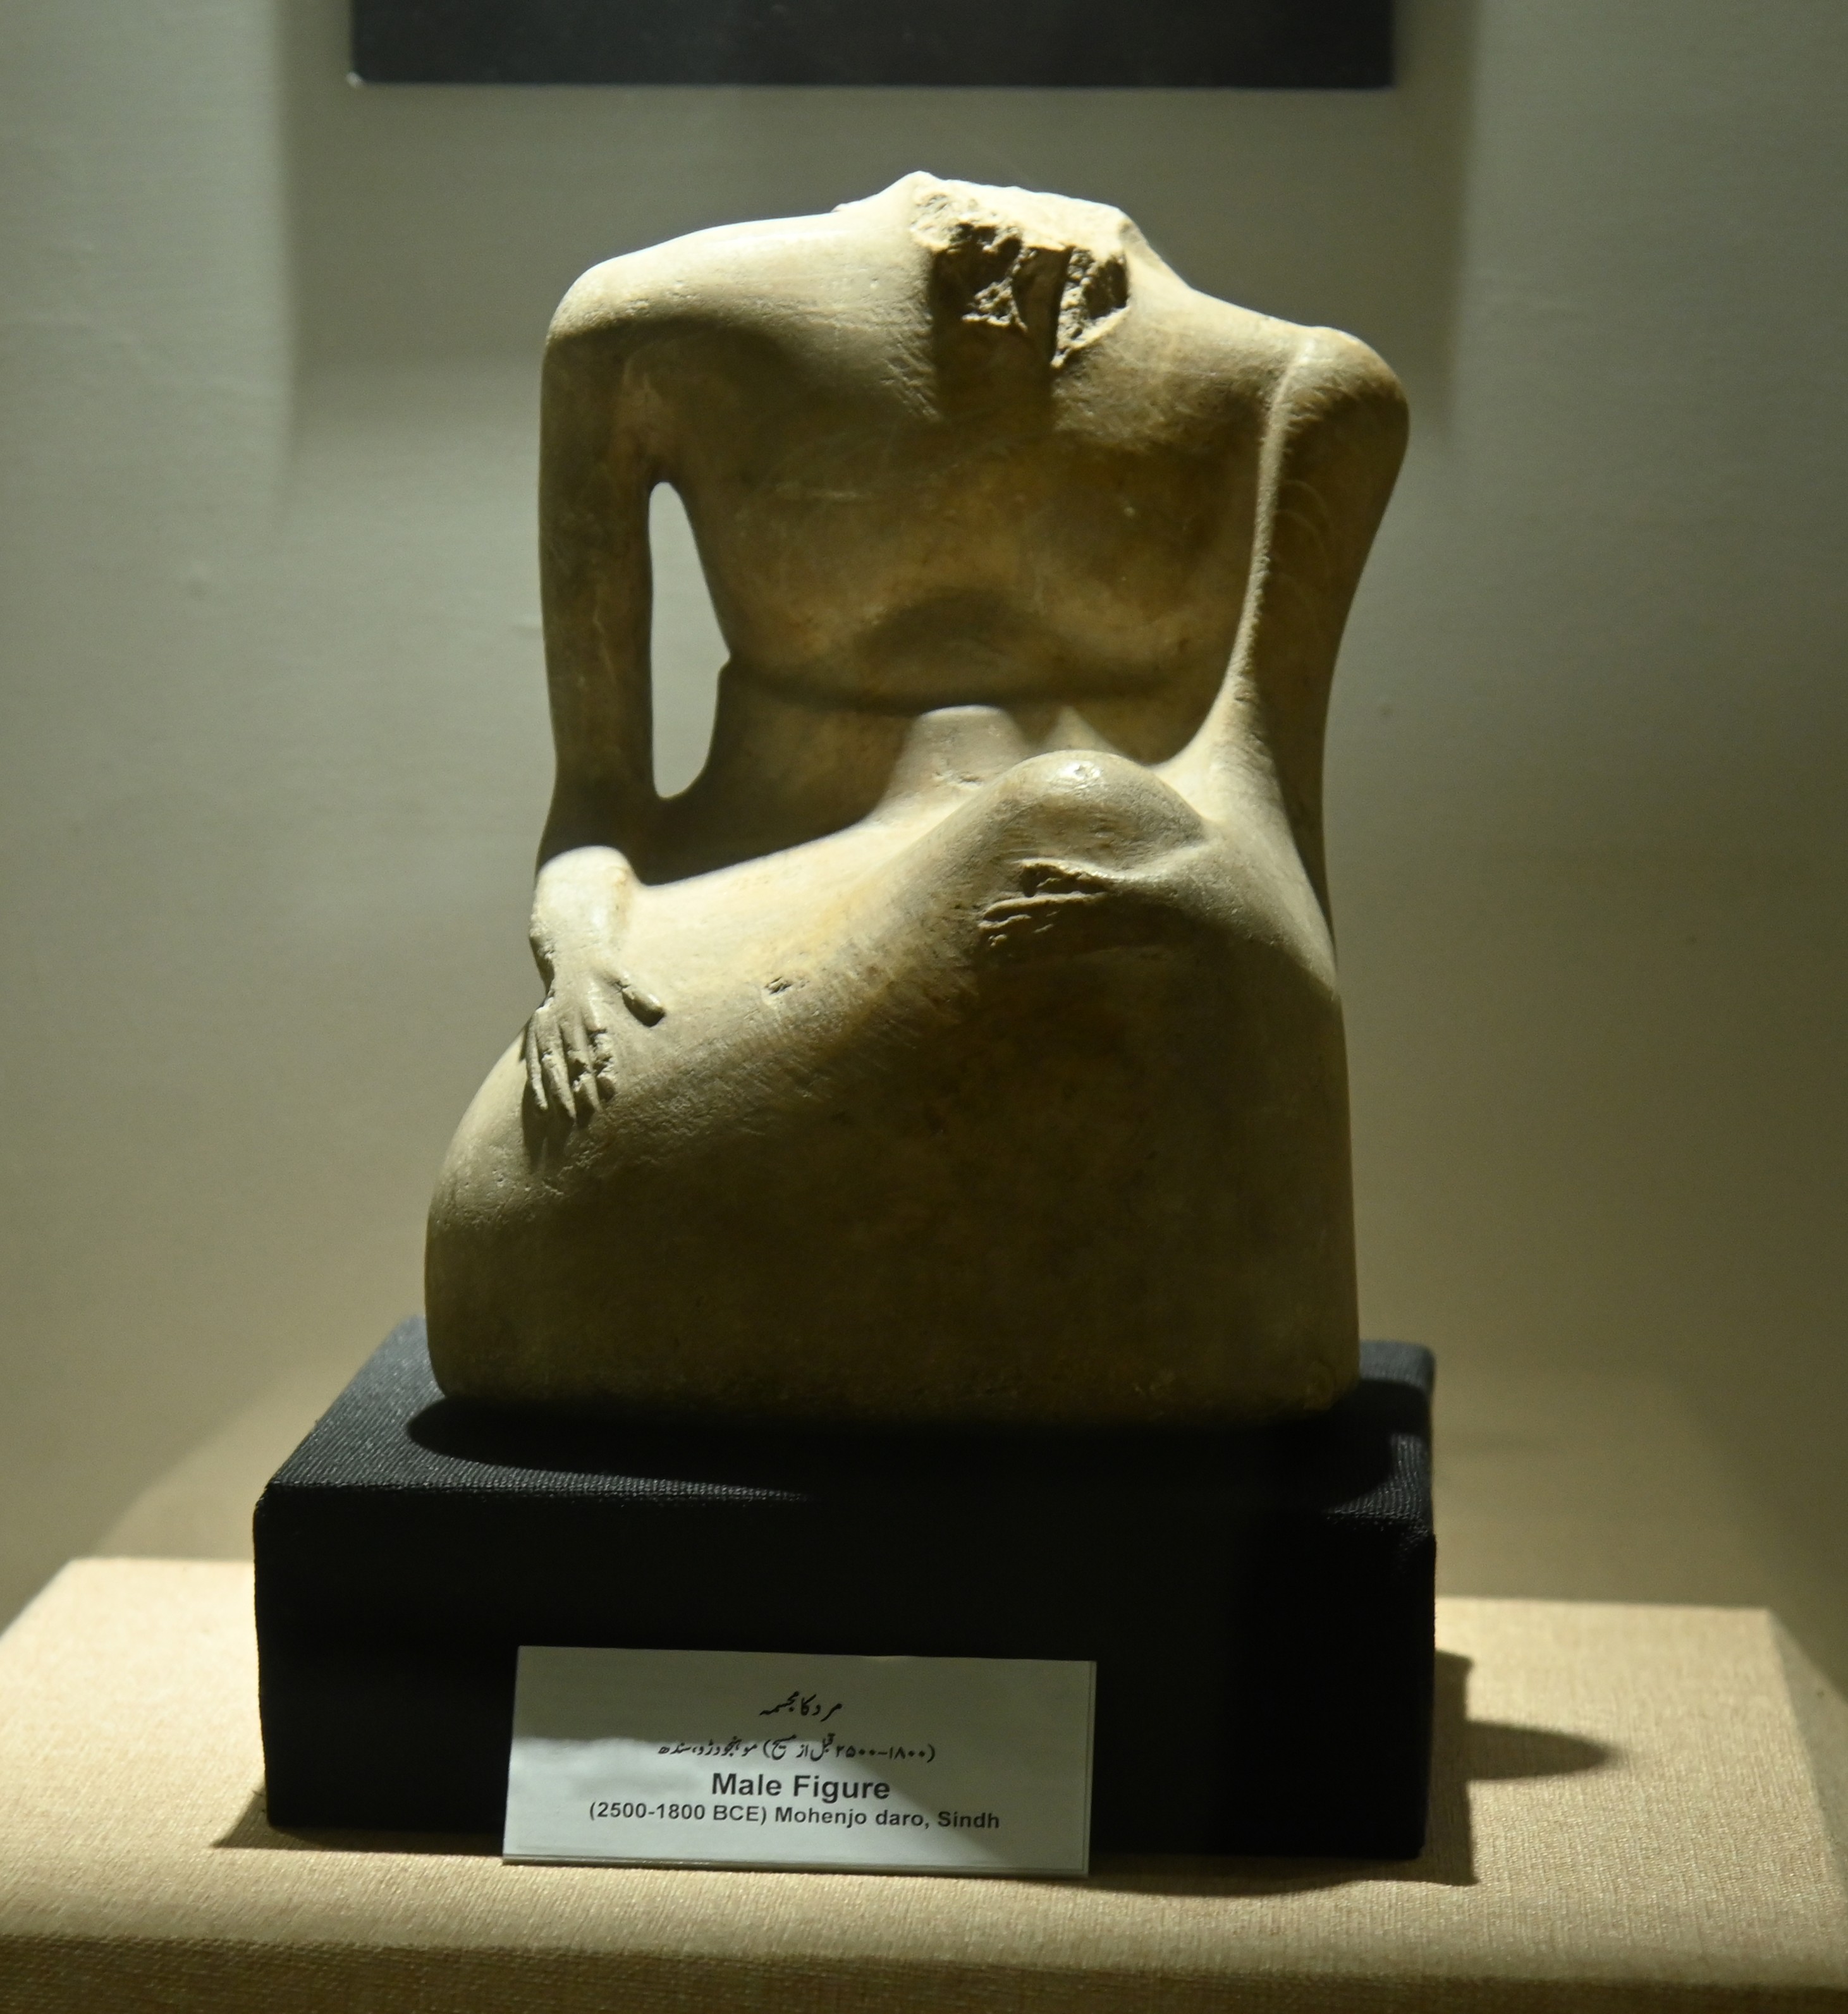 The Statue of Male Figure of about 2500-1800 BCE